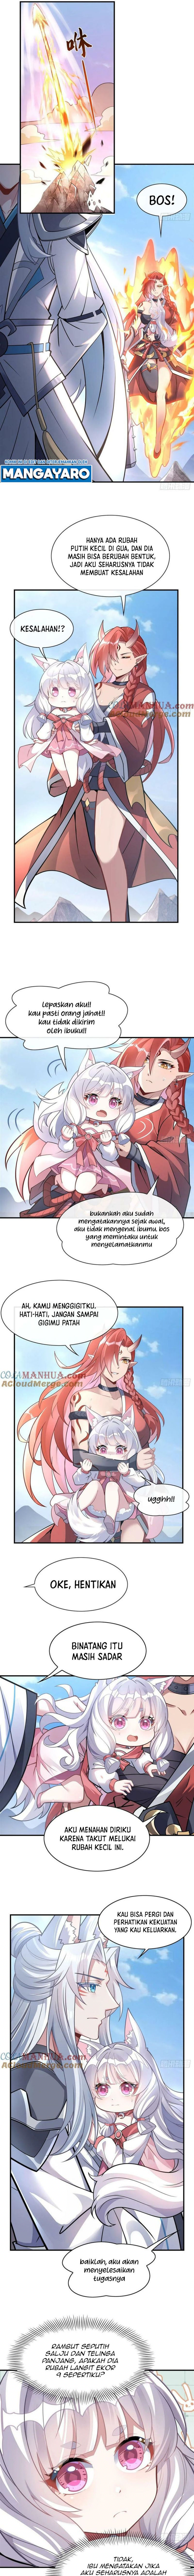 Dilarang COPAS - situs resmi www.mangacanblog.com - Komik my female apprentices are all big shots from the future 167 - chapter 167 168 Indonesia my female apprentices are all big shots from the future 167 - chapter 167 Terbaru 3|Baca Manga Komik Indonesia|Mangacan